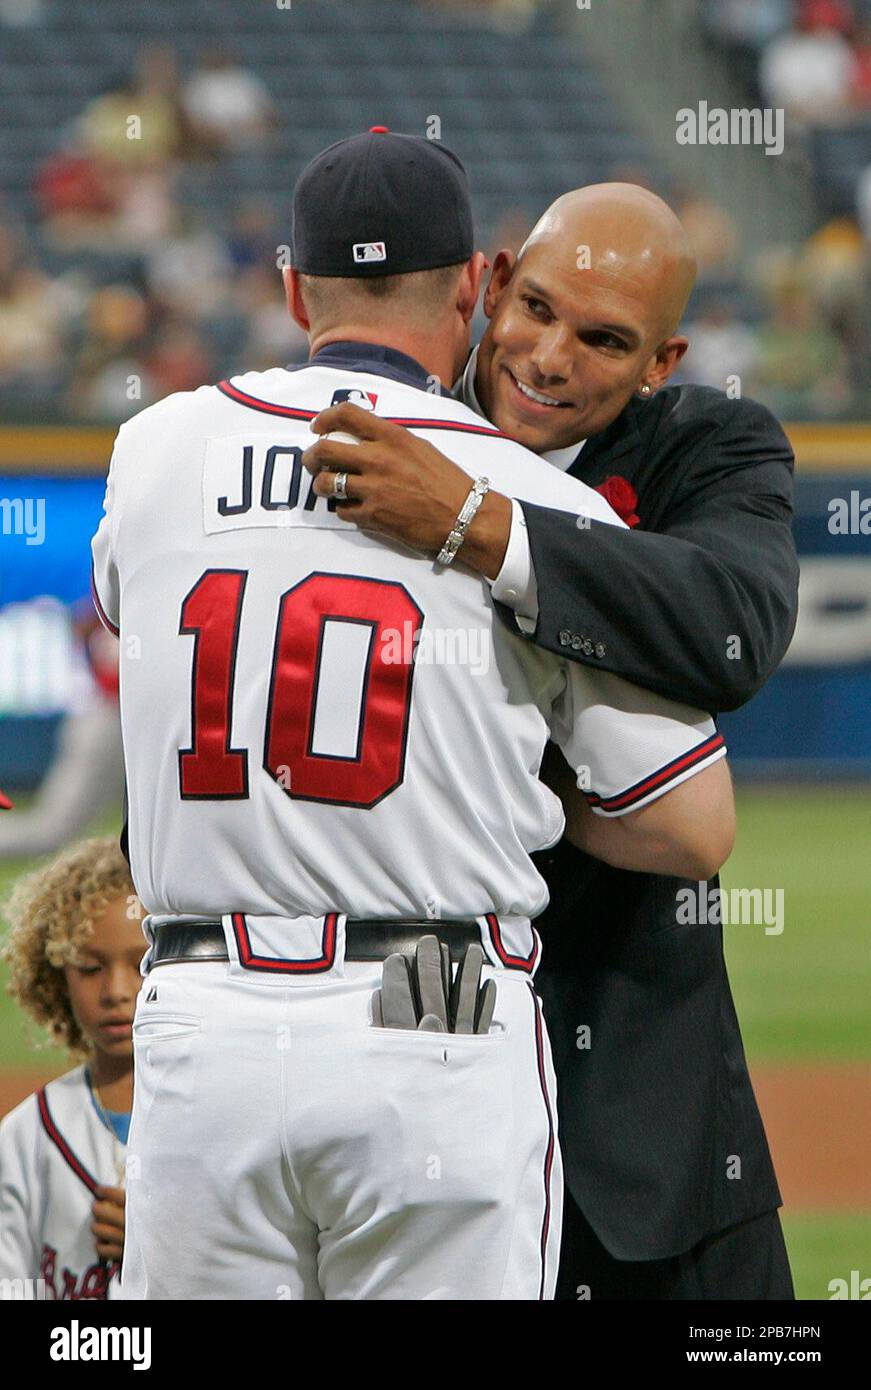 Former Atlanta Braves player David Justice, right, hugs Braves third  baseman Chipper Jones after Justice was inducted into the Braves Hall of  Fame before the Braves' baseball game against the Arizona Diamondbacks